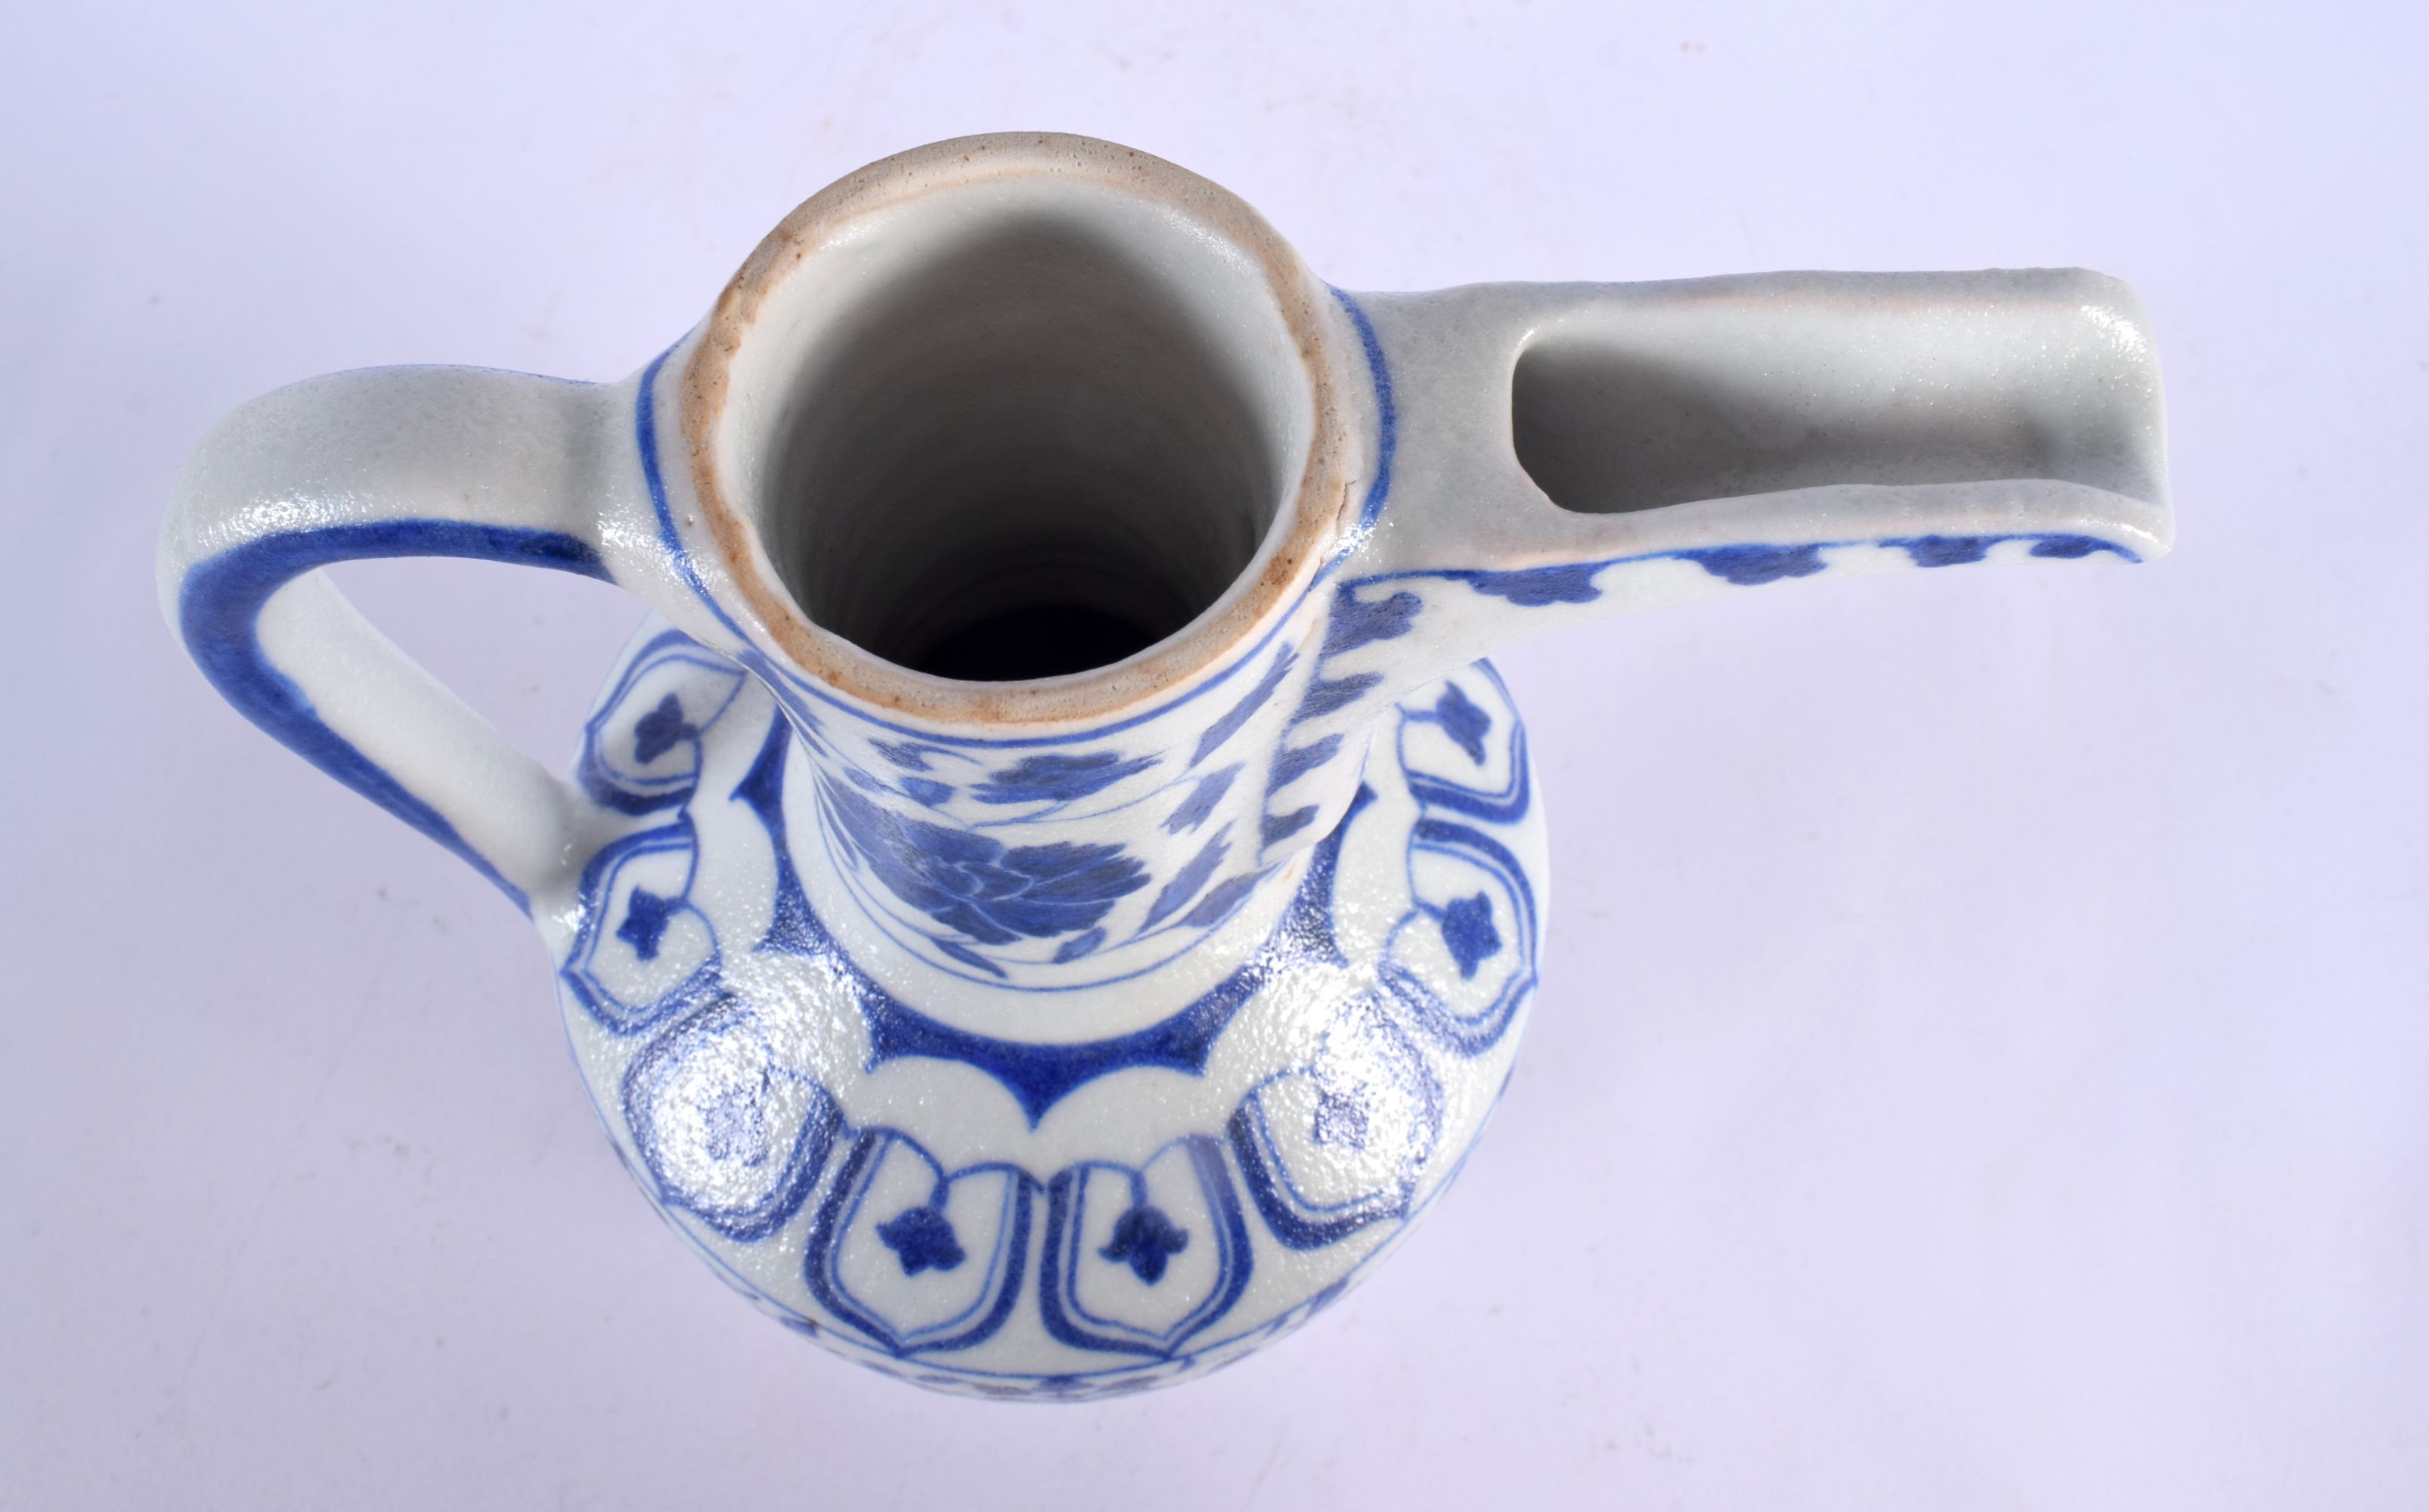 A TURKISH ISLAMIC BLUE AND WHITE WATER JUG. 27 cm high. - Image 3 of 4